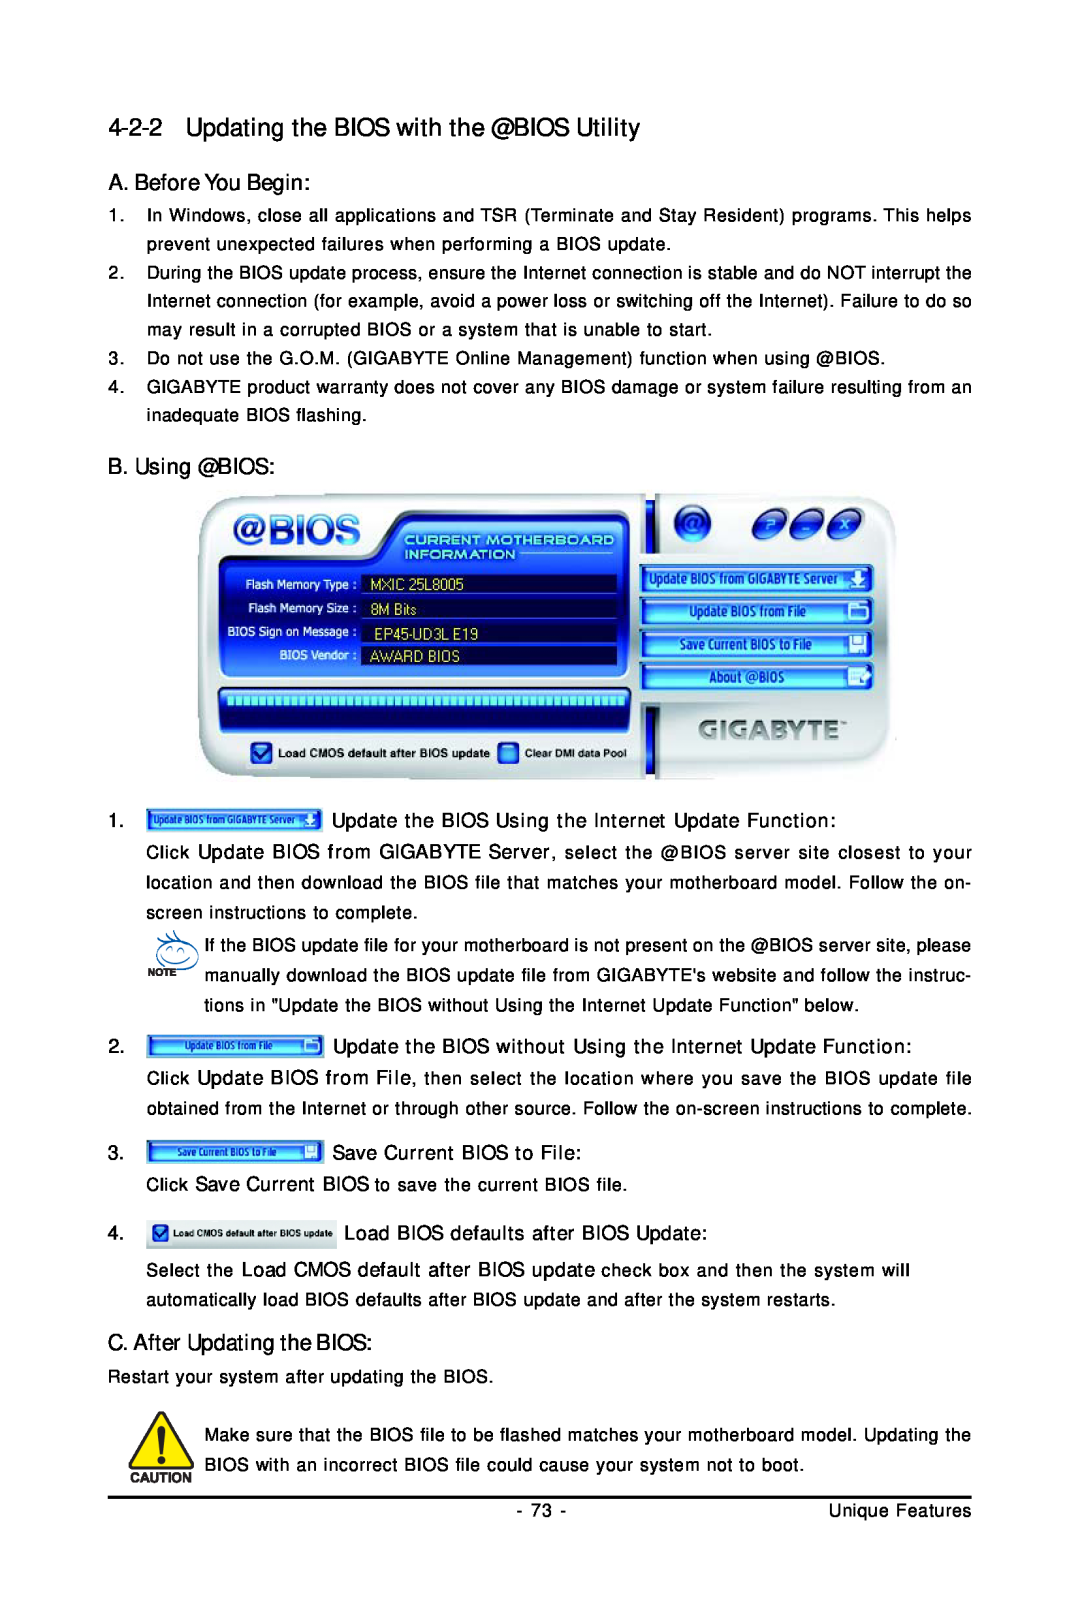 Gigabyte GA-EP45-UD3LR user manual Updating the BIOS with the @BIOS Utility, B. Using @BIOS, C. After Updating the BIOS 